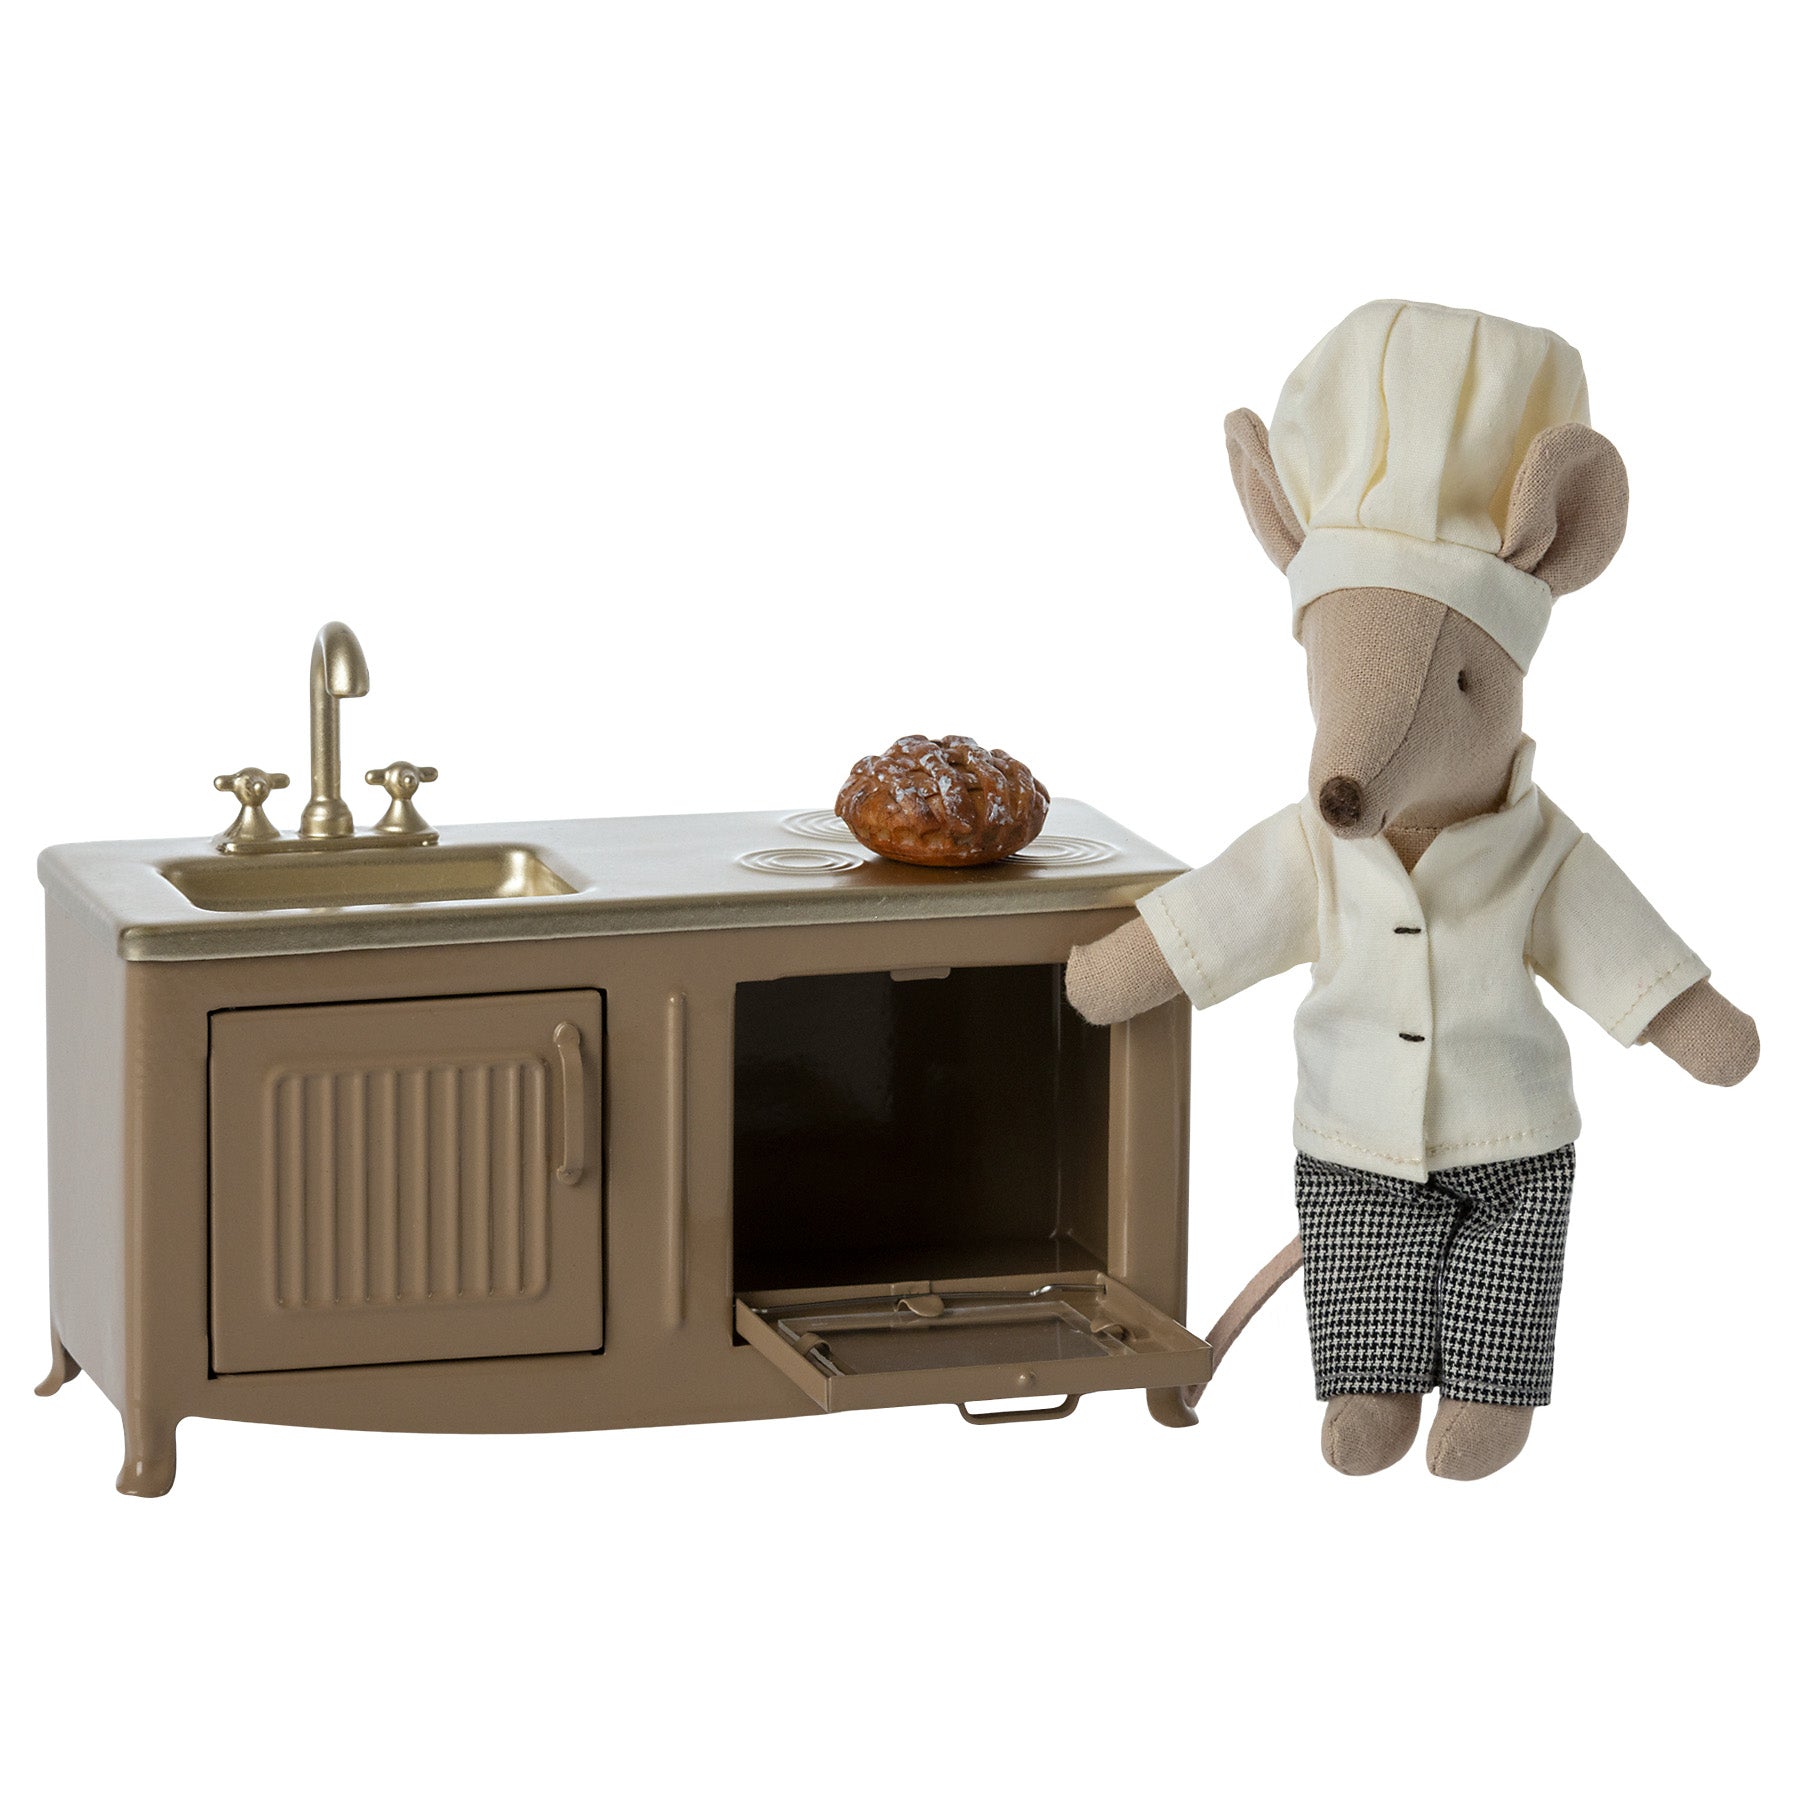 Maileg Kitchen, Light Brown - Mouse